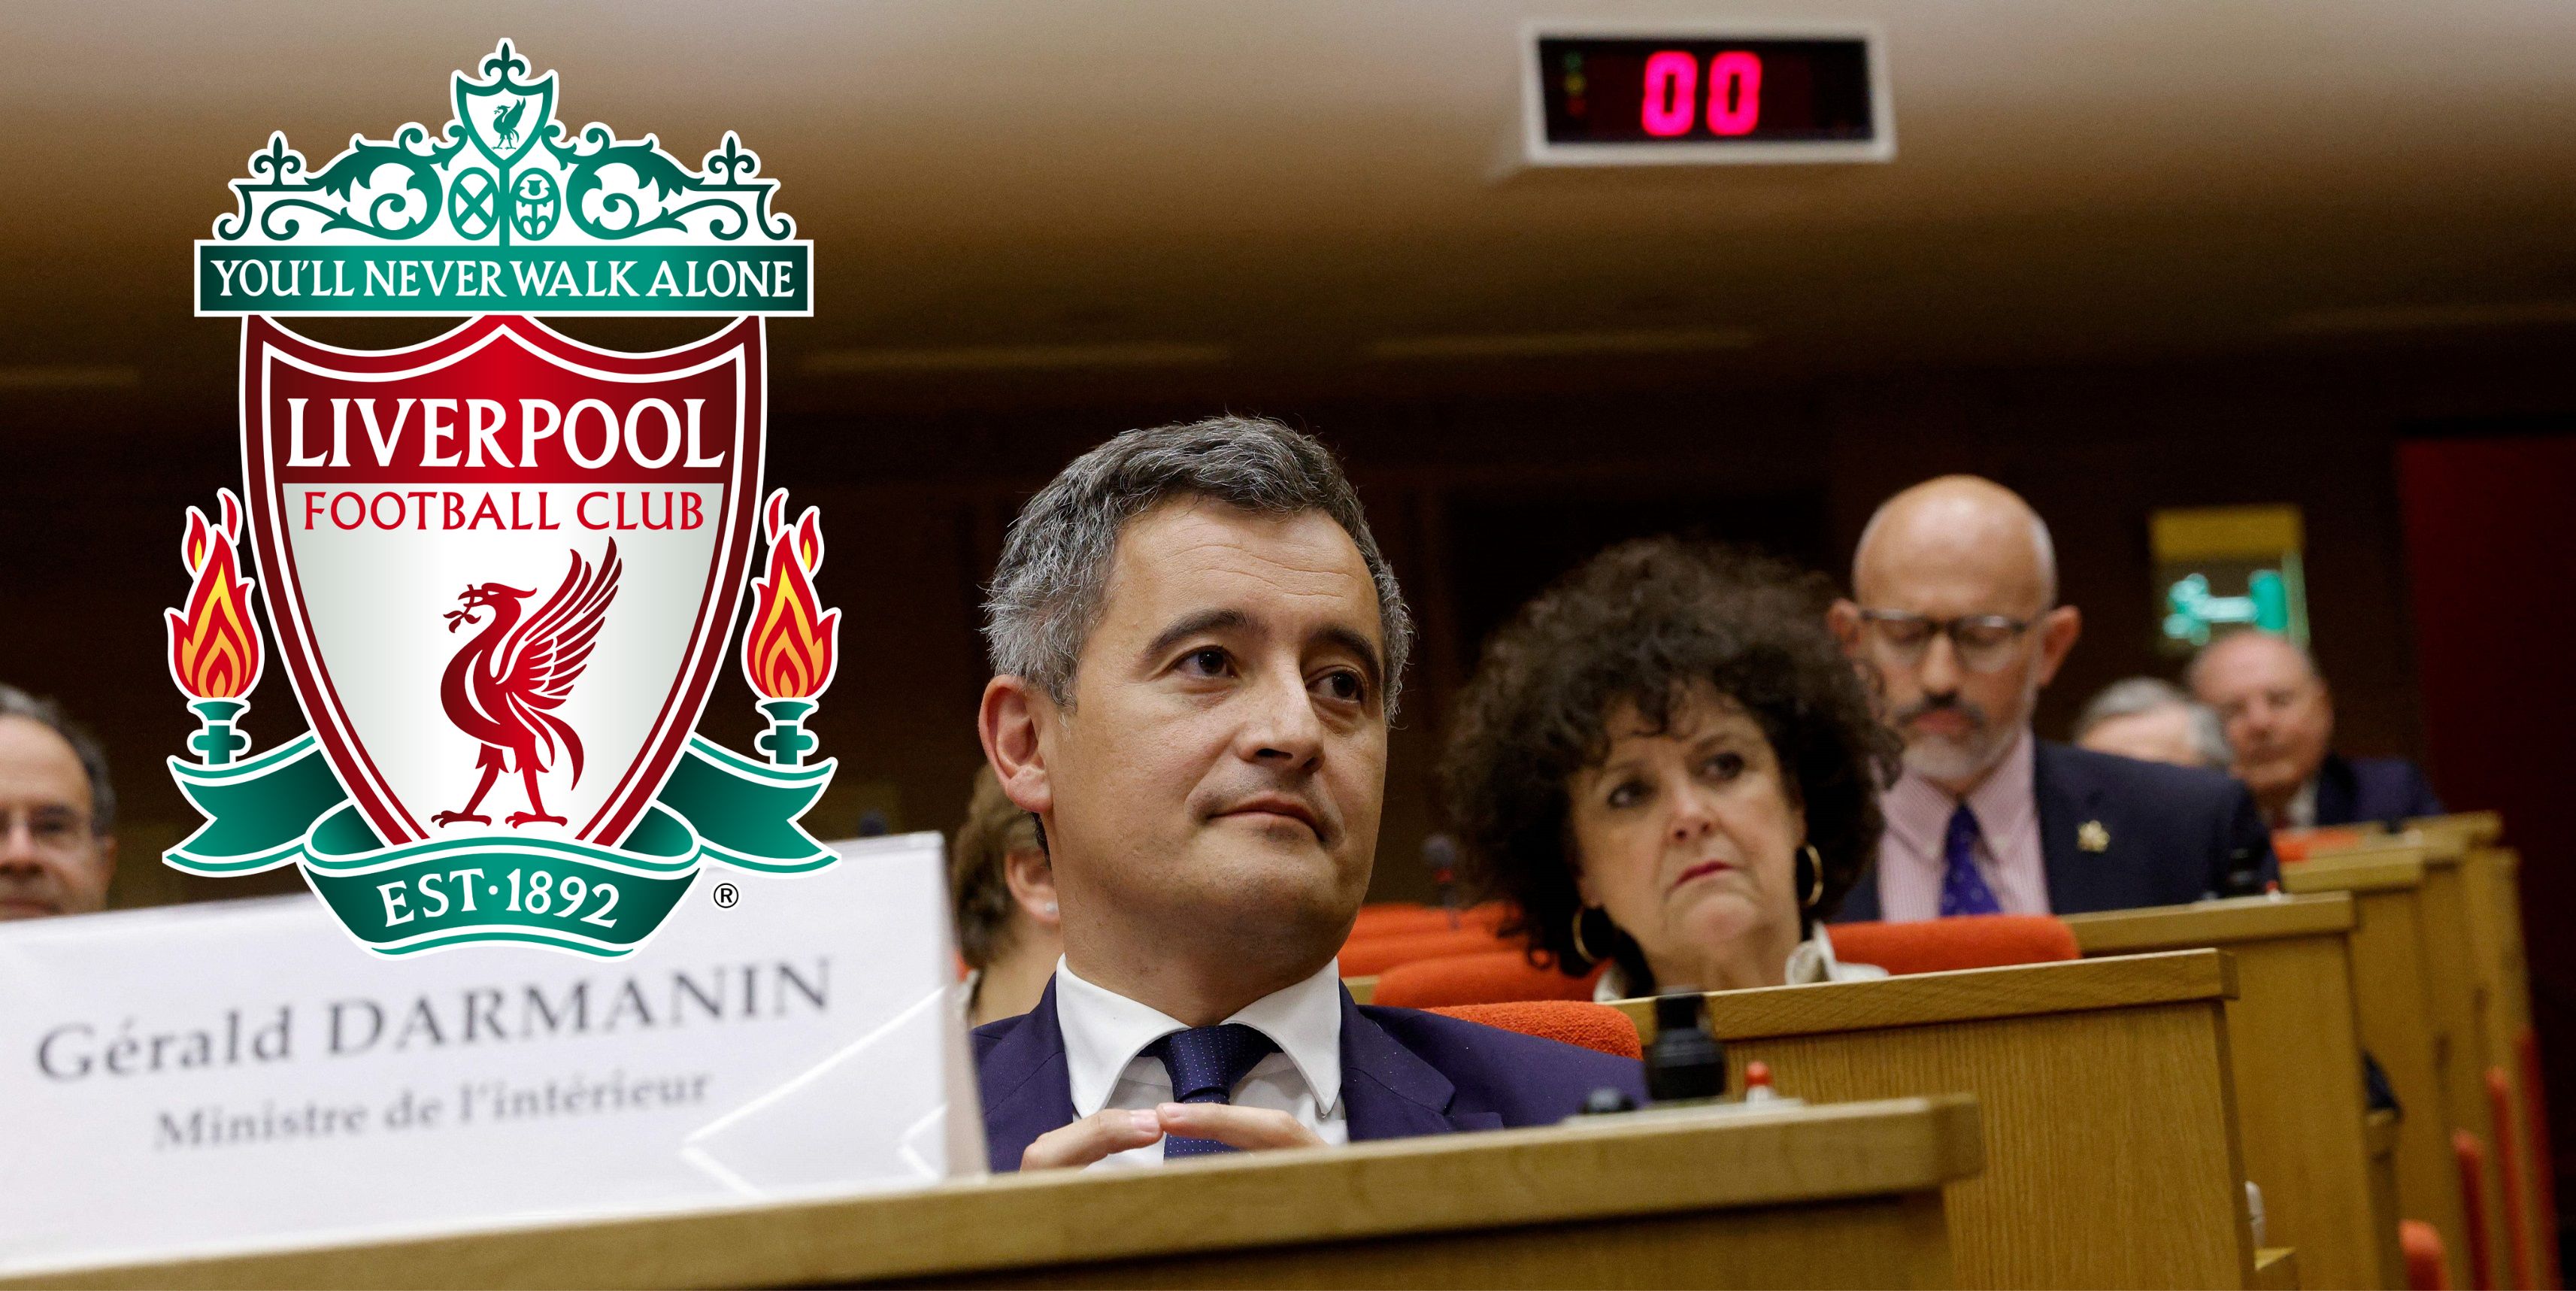 Gerald Darmanin doubles down on Champions League final lies in shocking comments to French senate